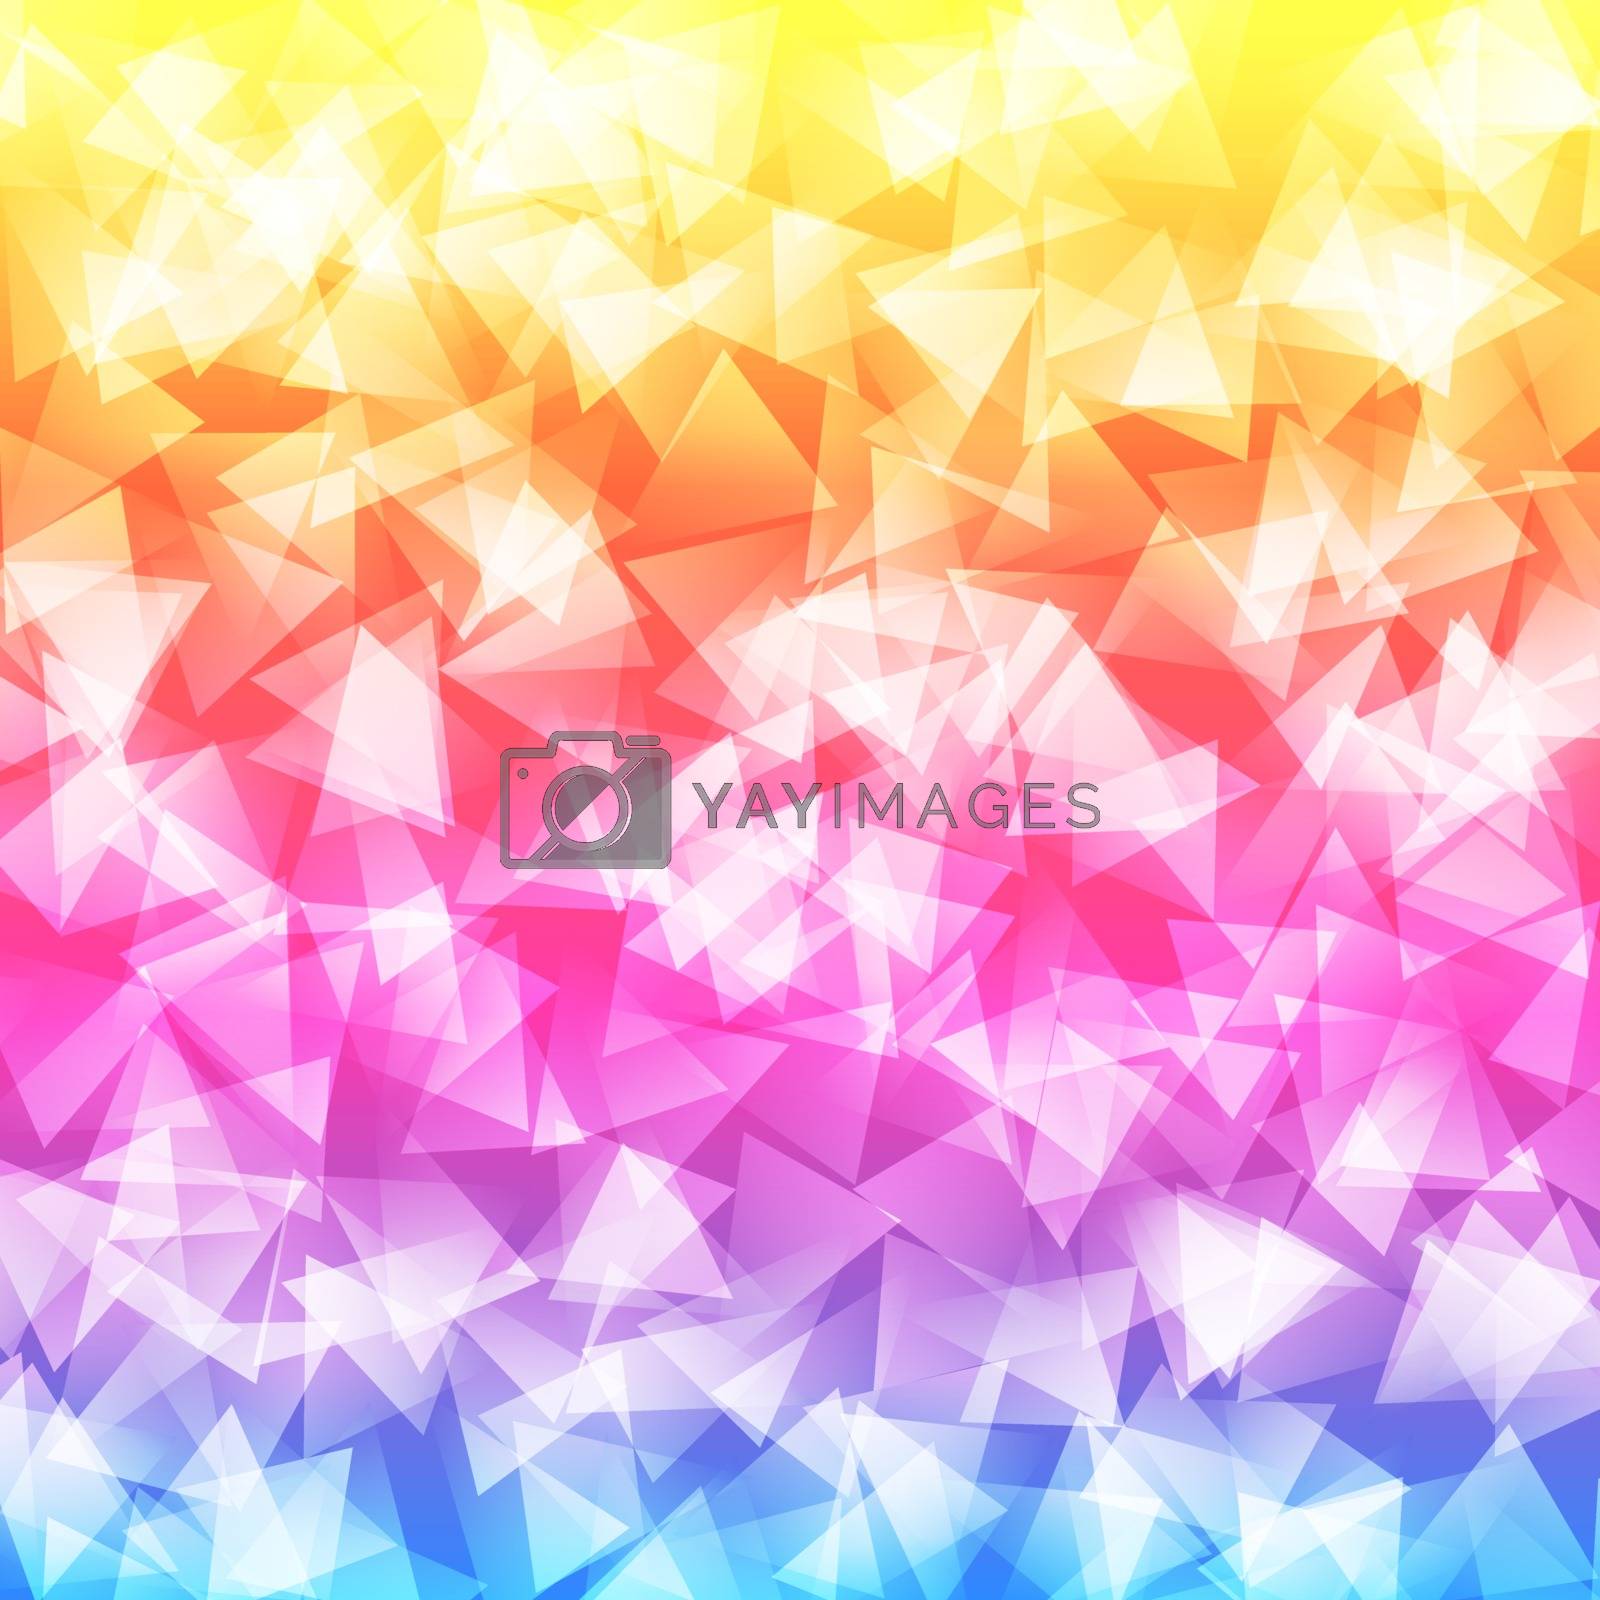 Royalty free image of Abstract background by kartyl